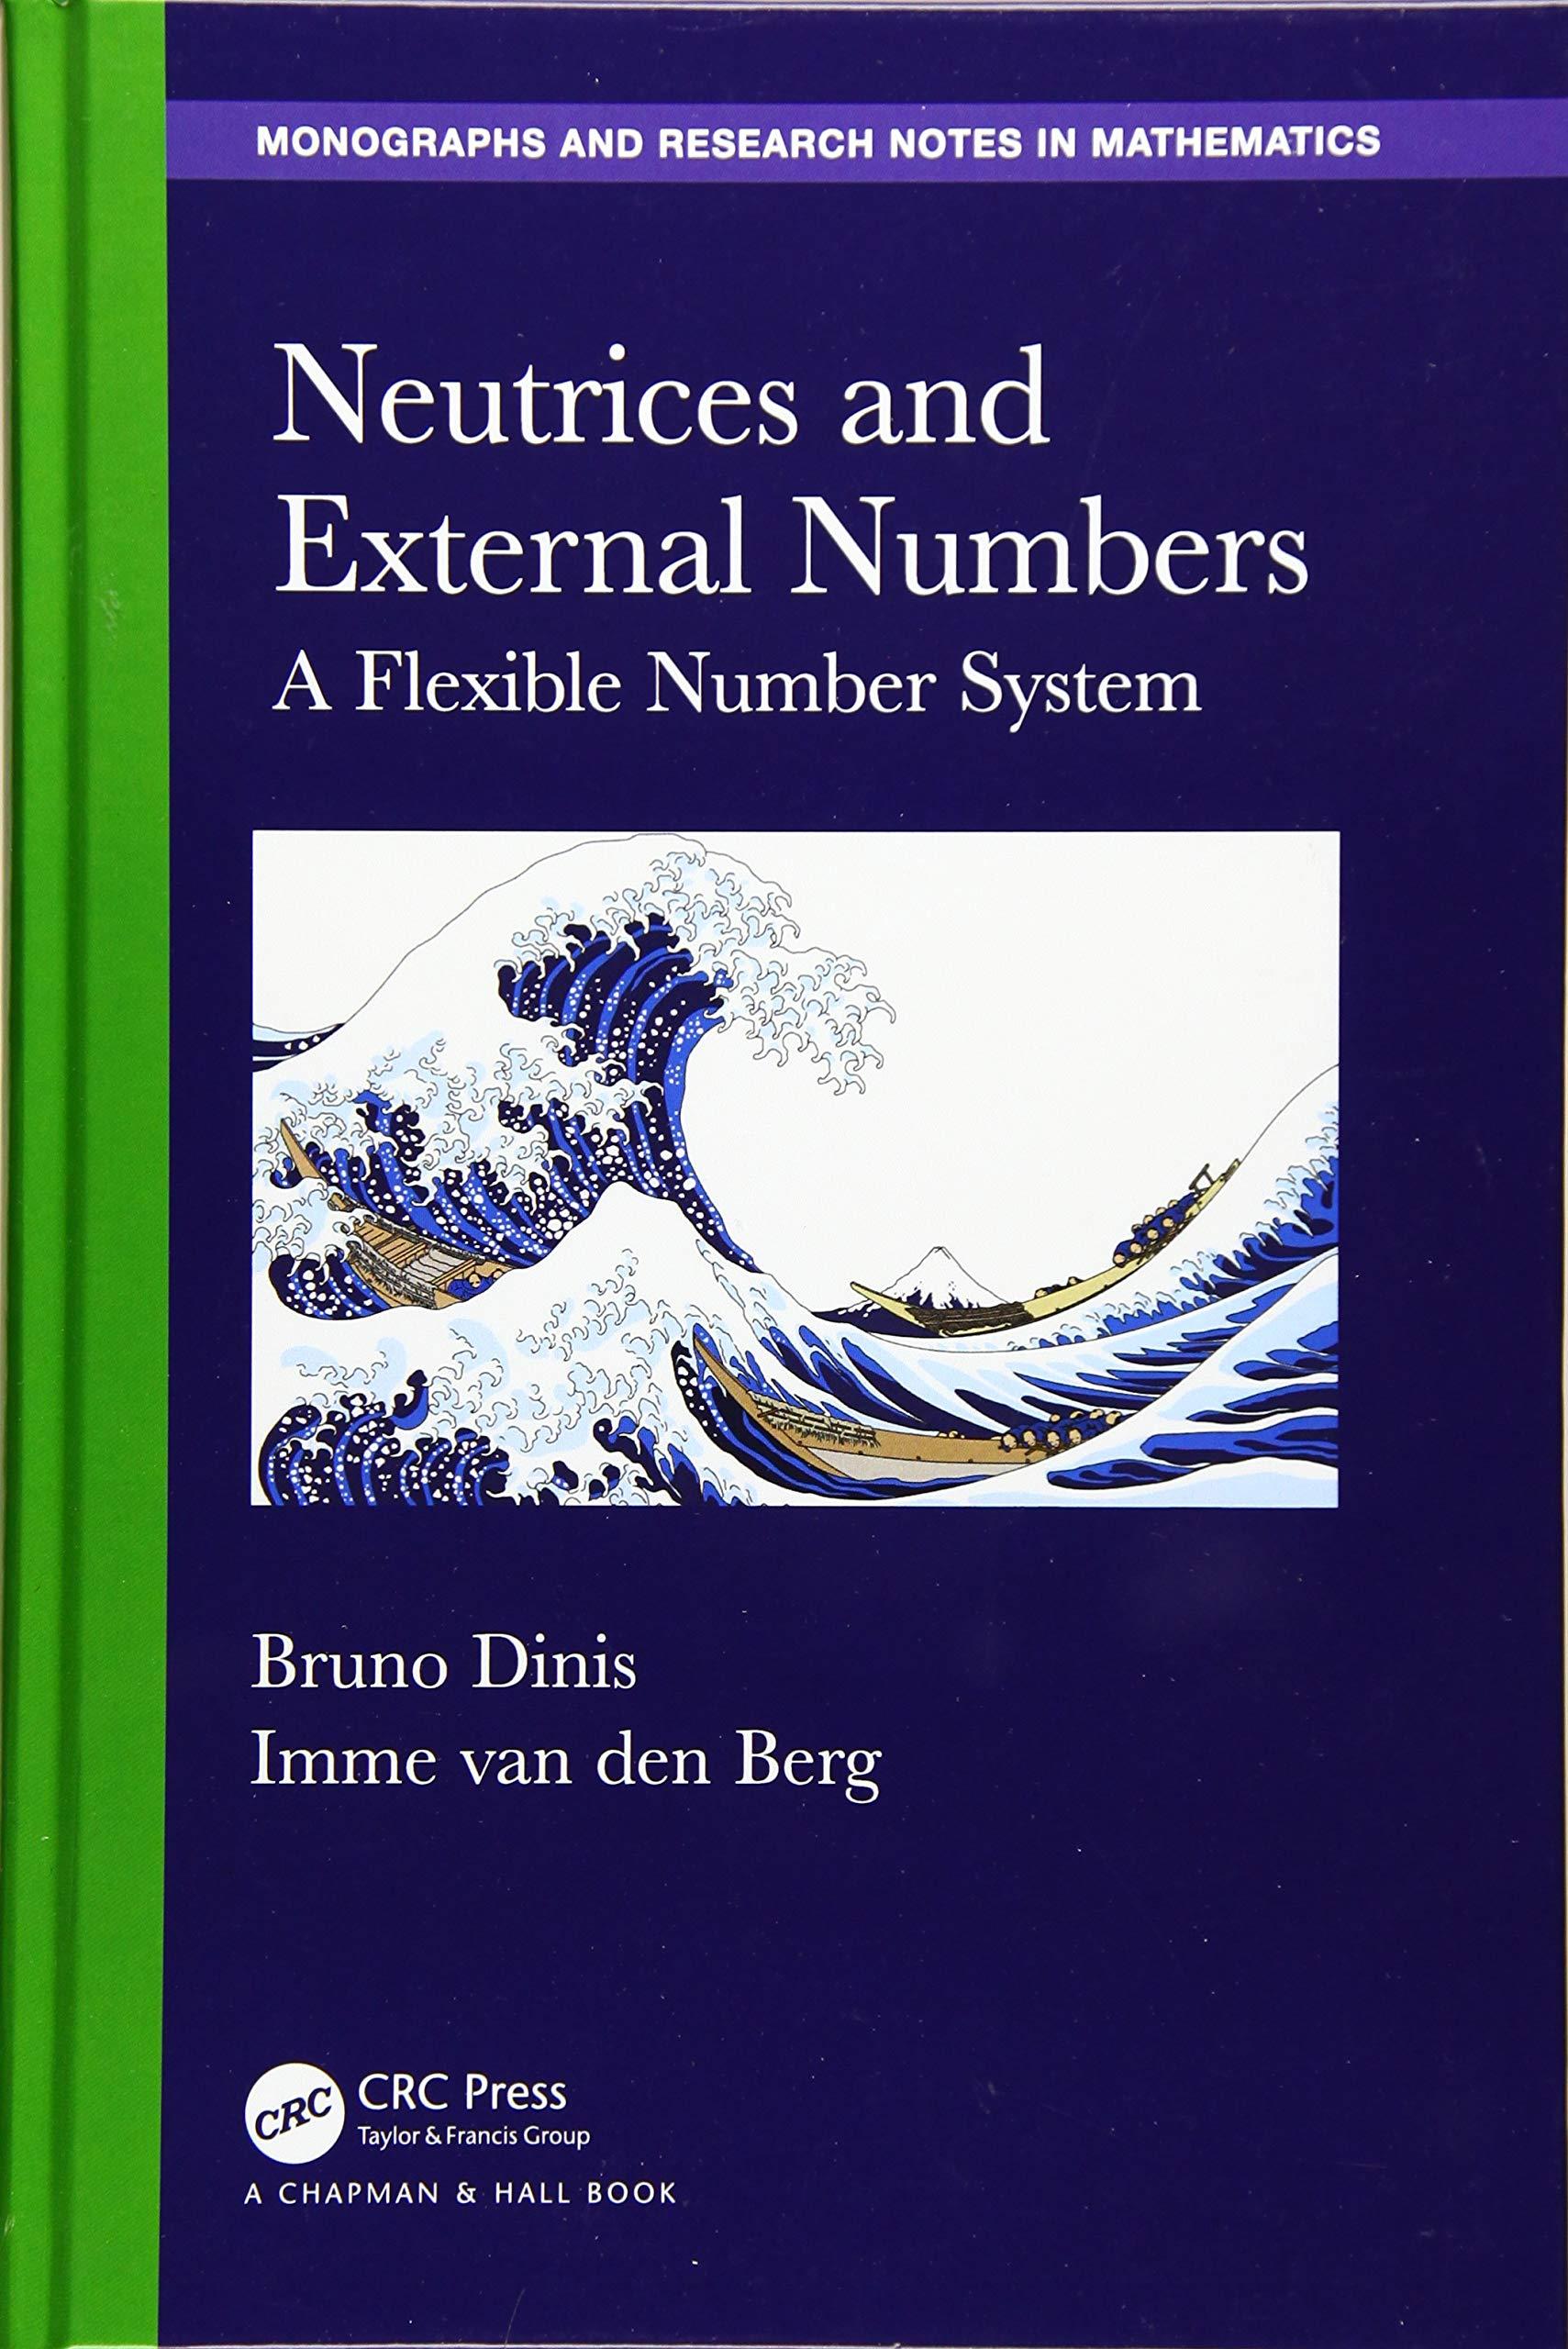 neutrices and external numbers 1st edition bruno dinis, imme van den berg 1498772676, 9781498772679